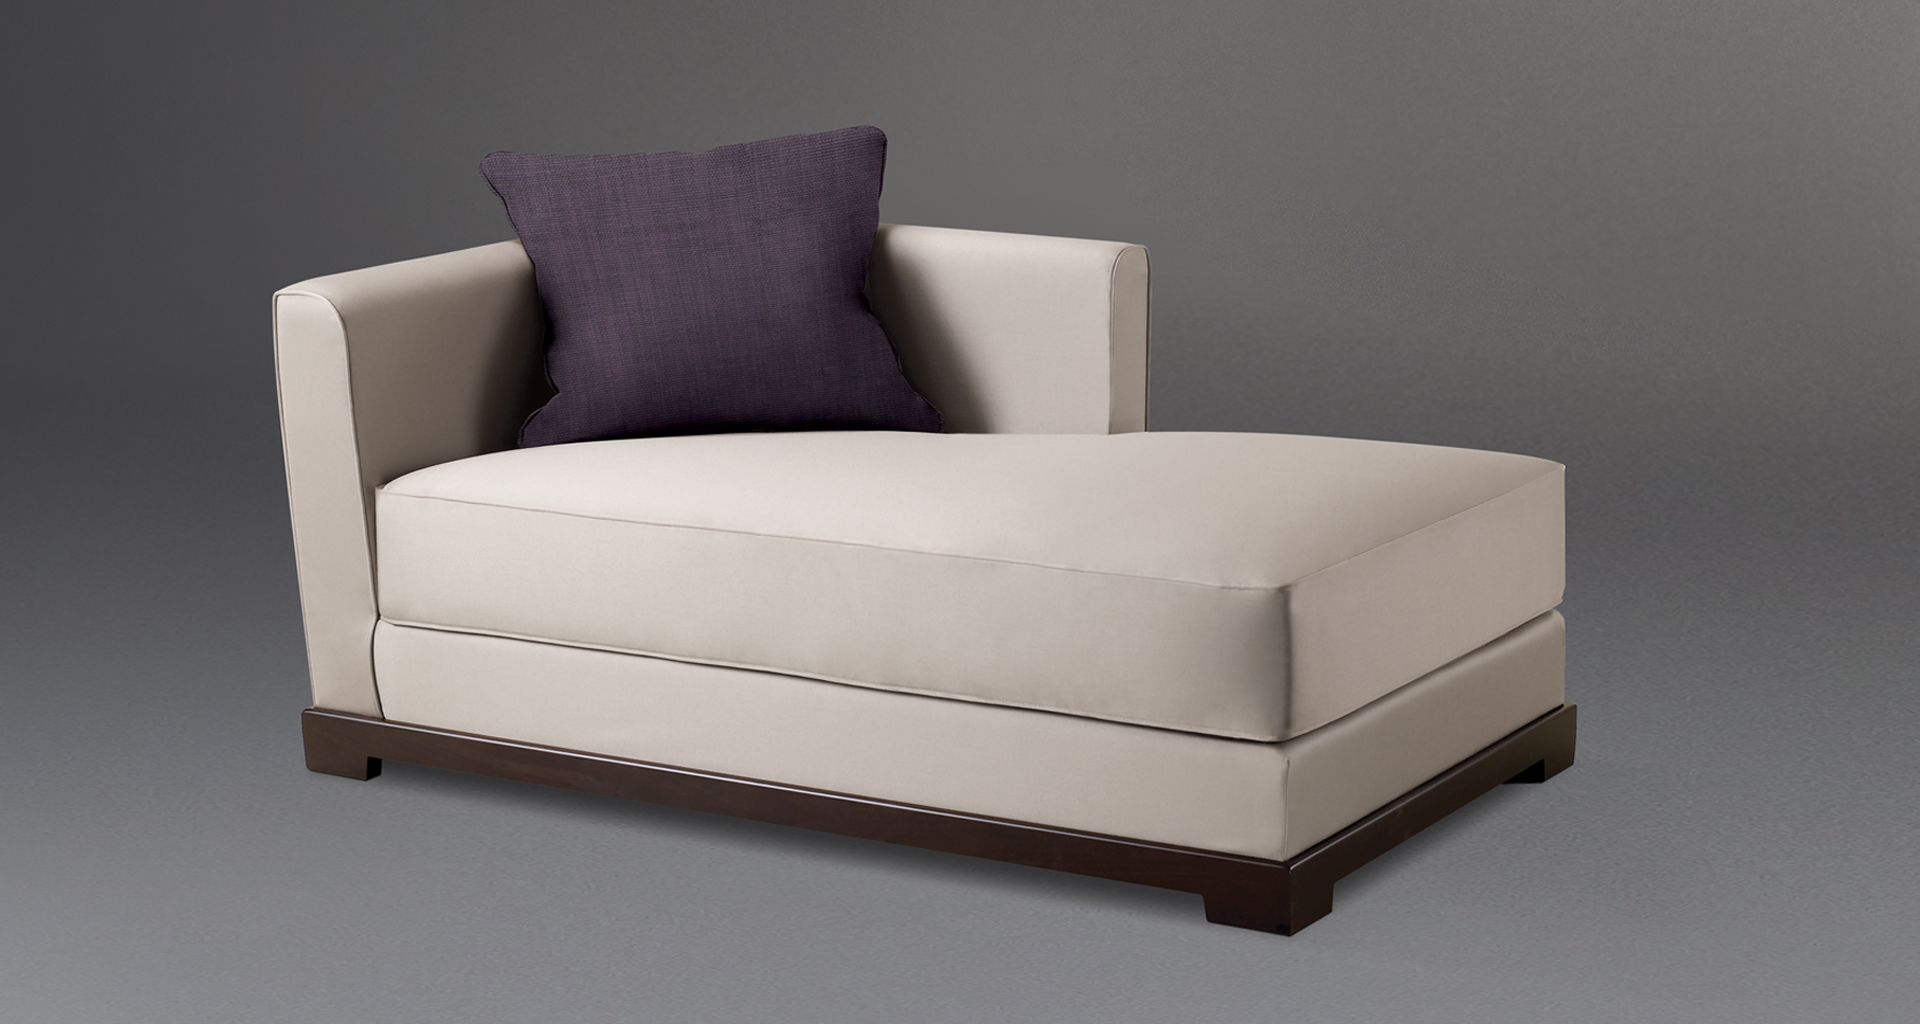 Wanda is a wooden chaise longue covered in fabric, from Promemoria's catalogue | Promemoria